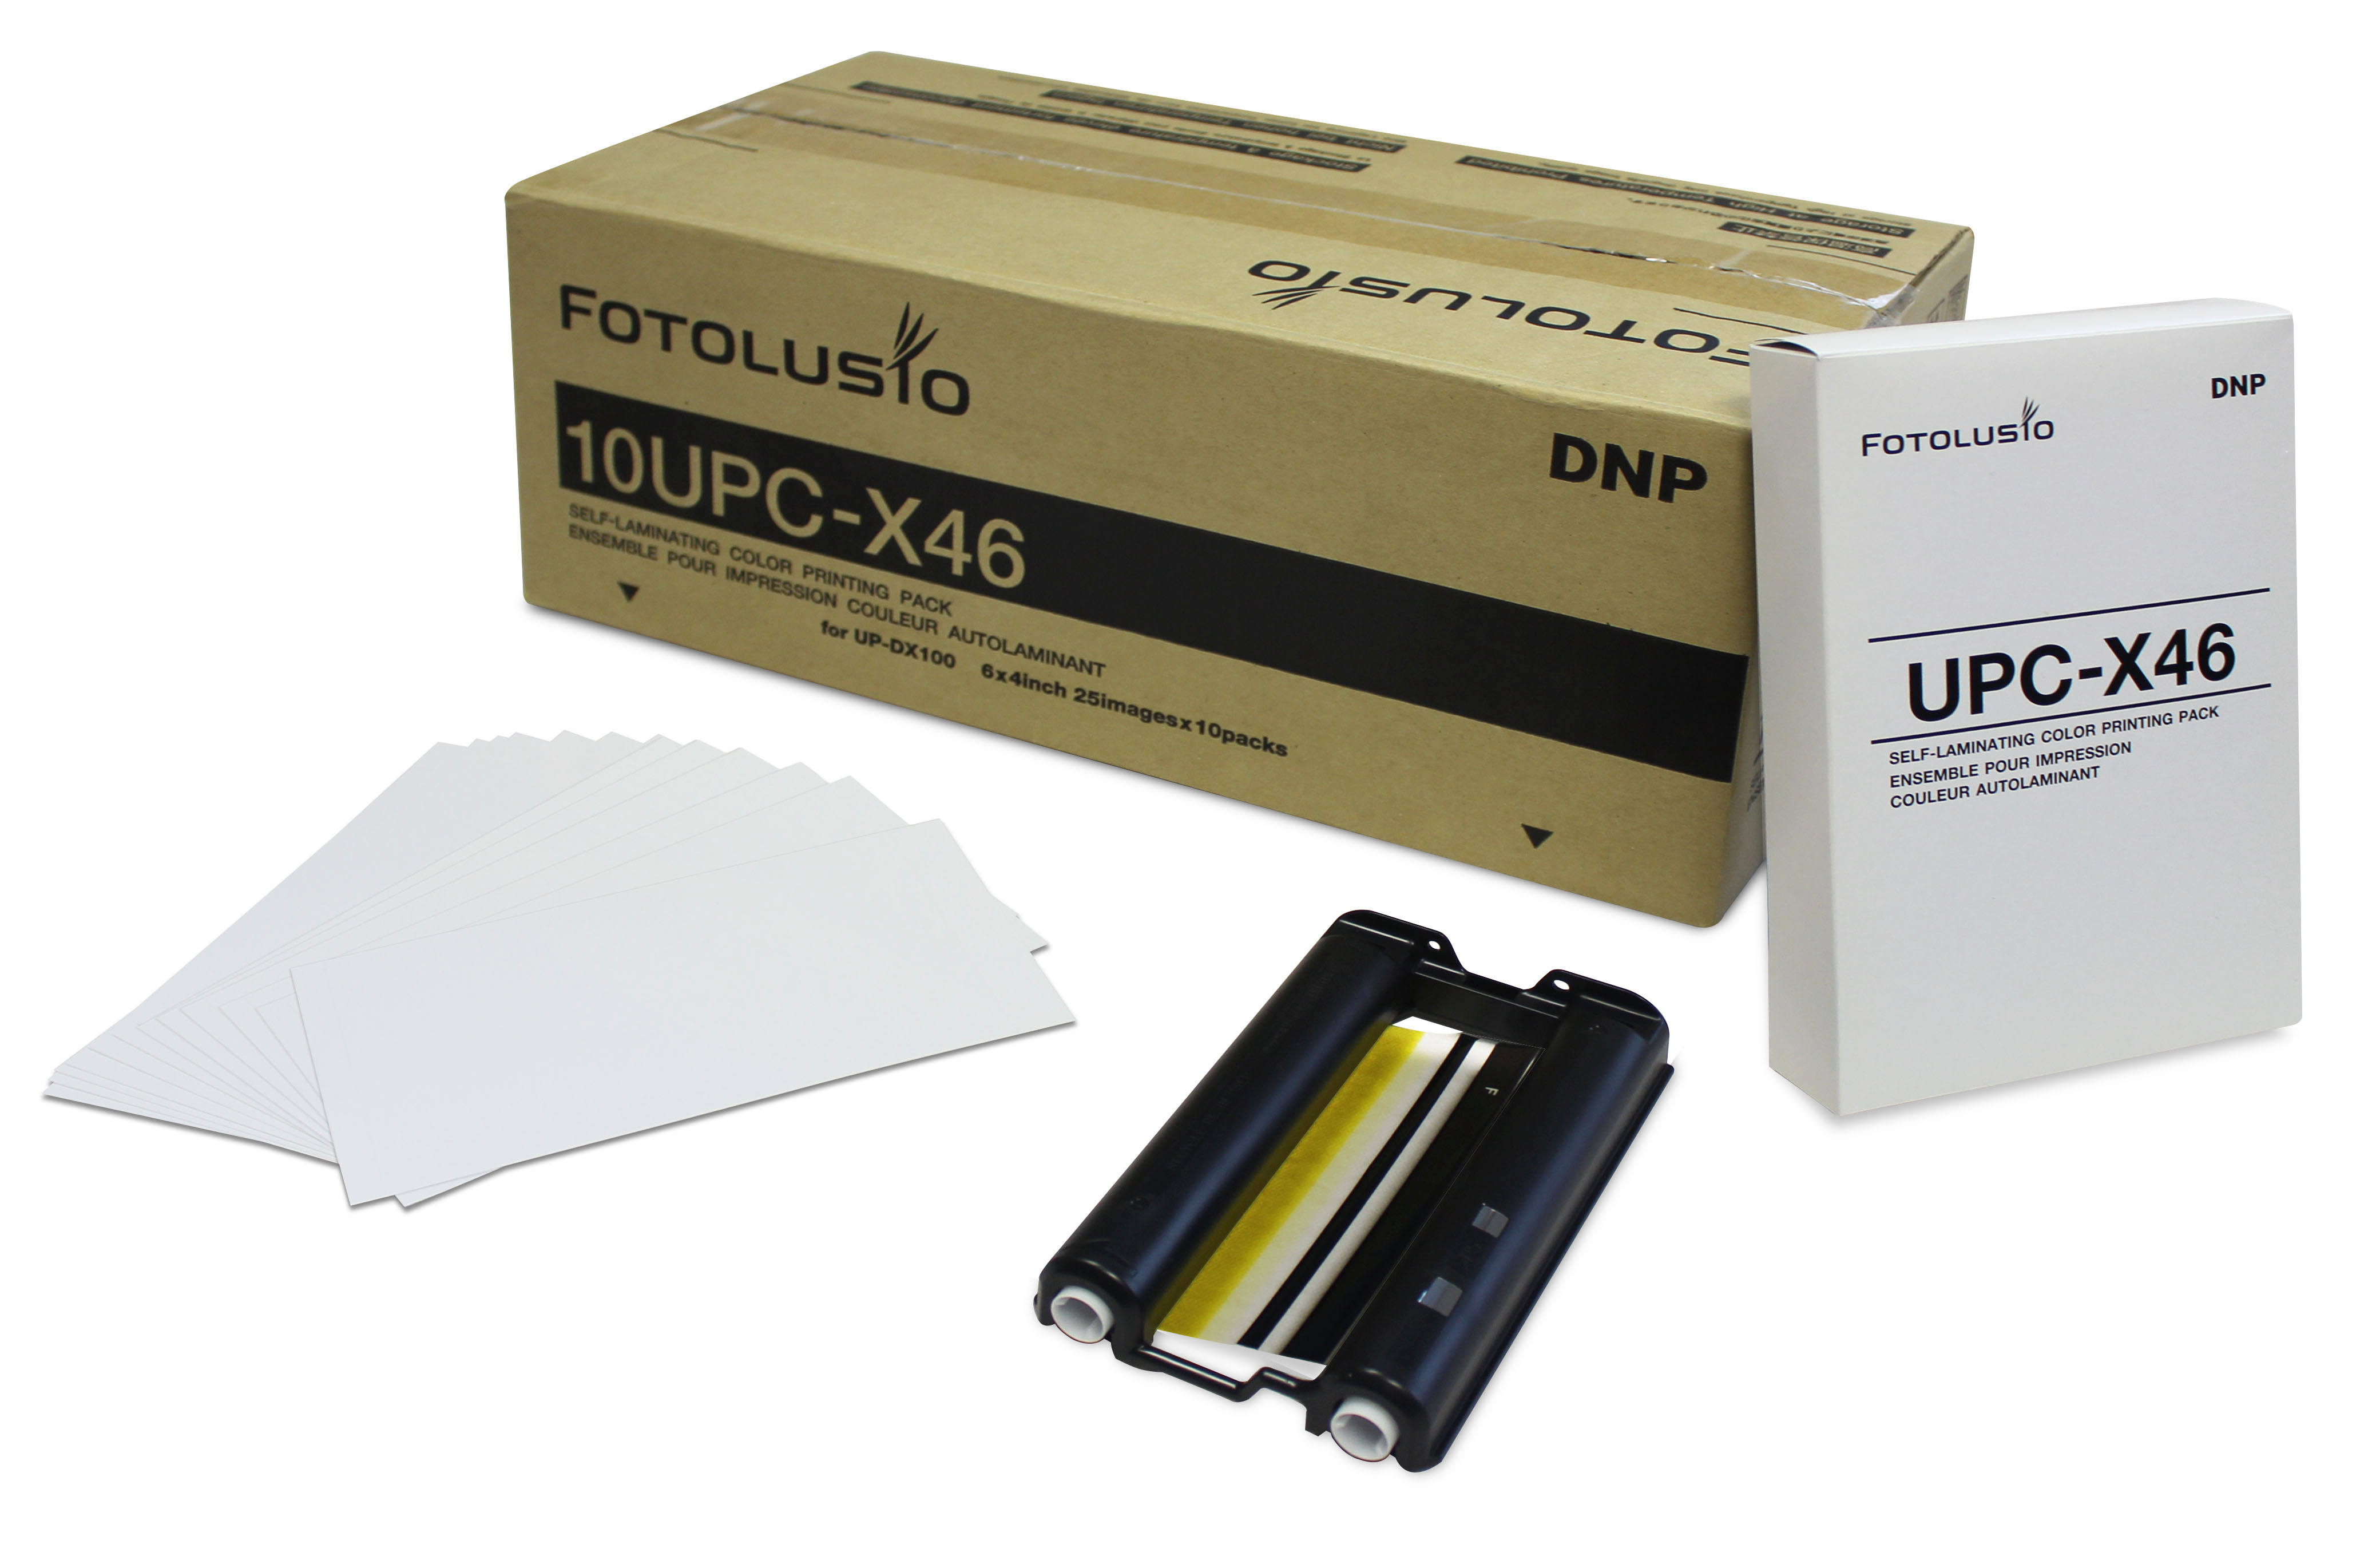 10UPC-X46 (for ID400/C200/300, 4x6)